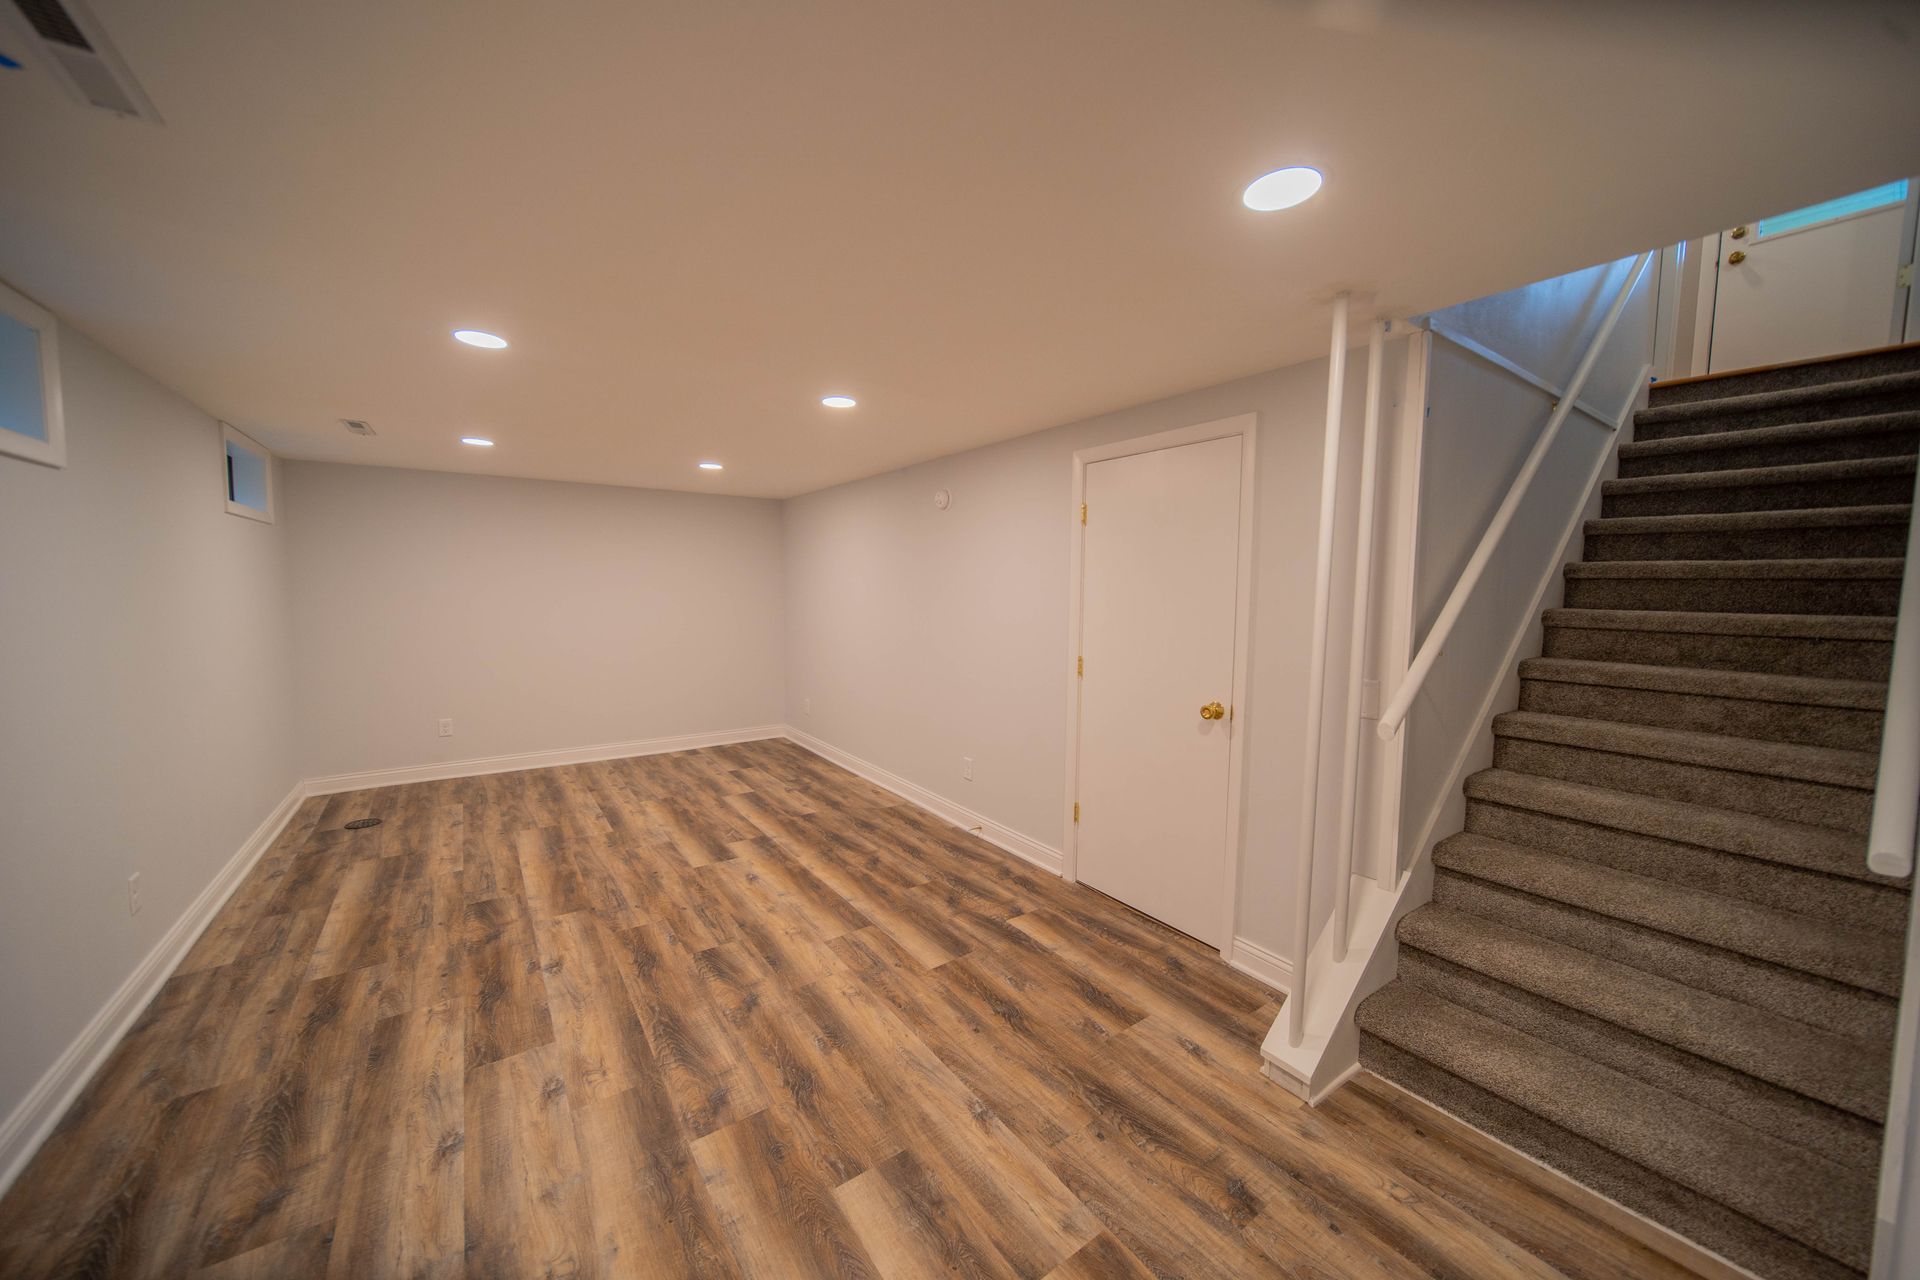 An empty basement with hardwood floors and stairs leading up to the second floor.